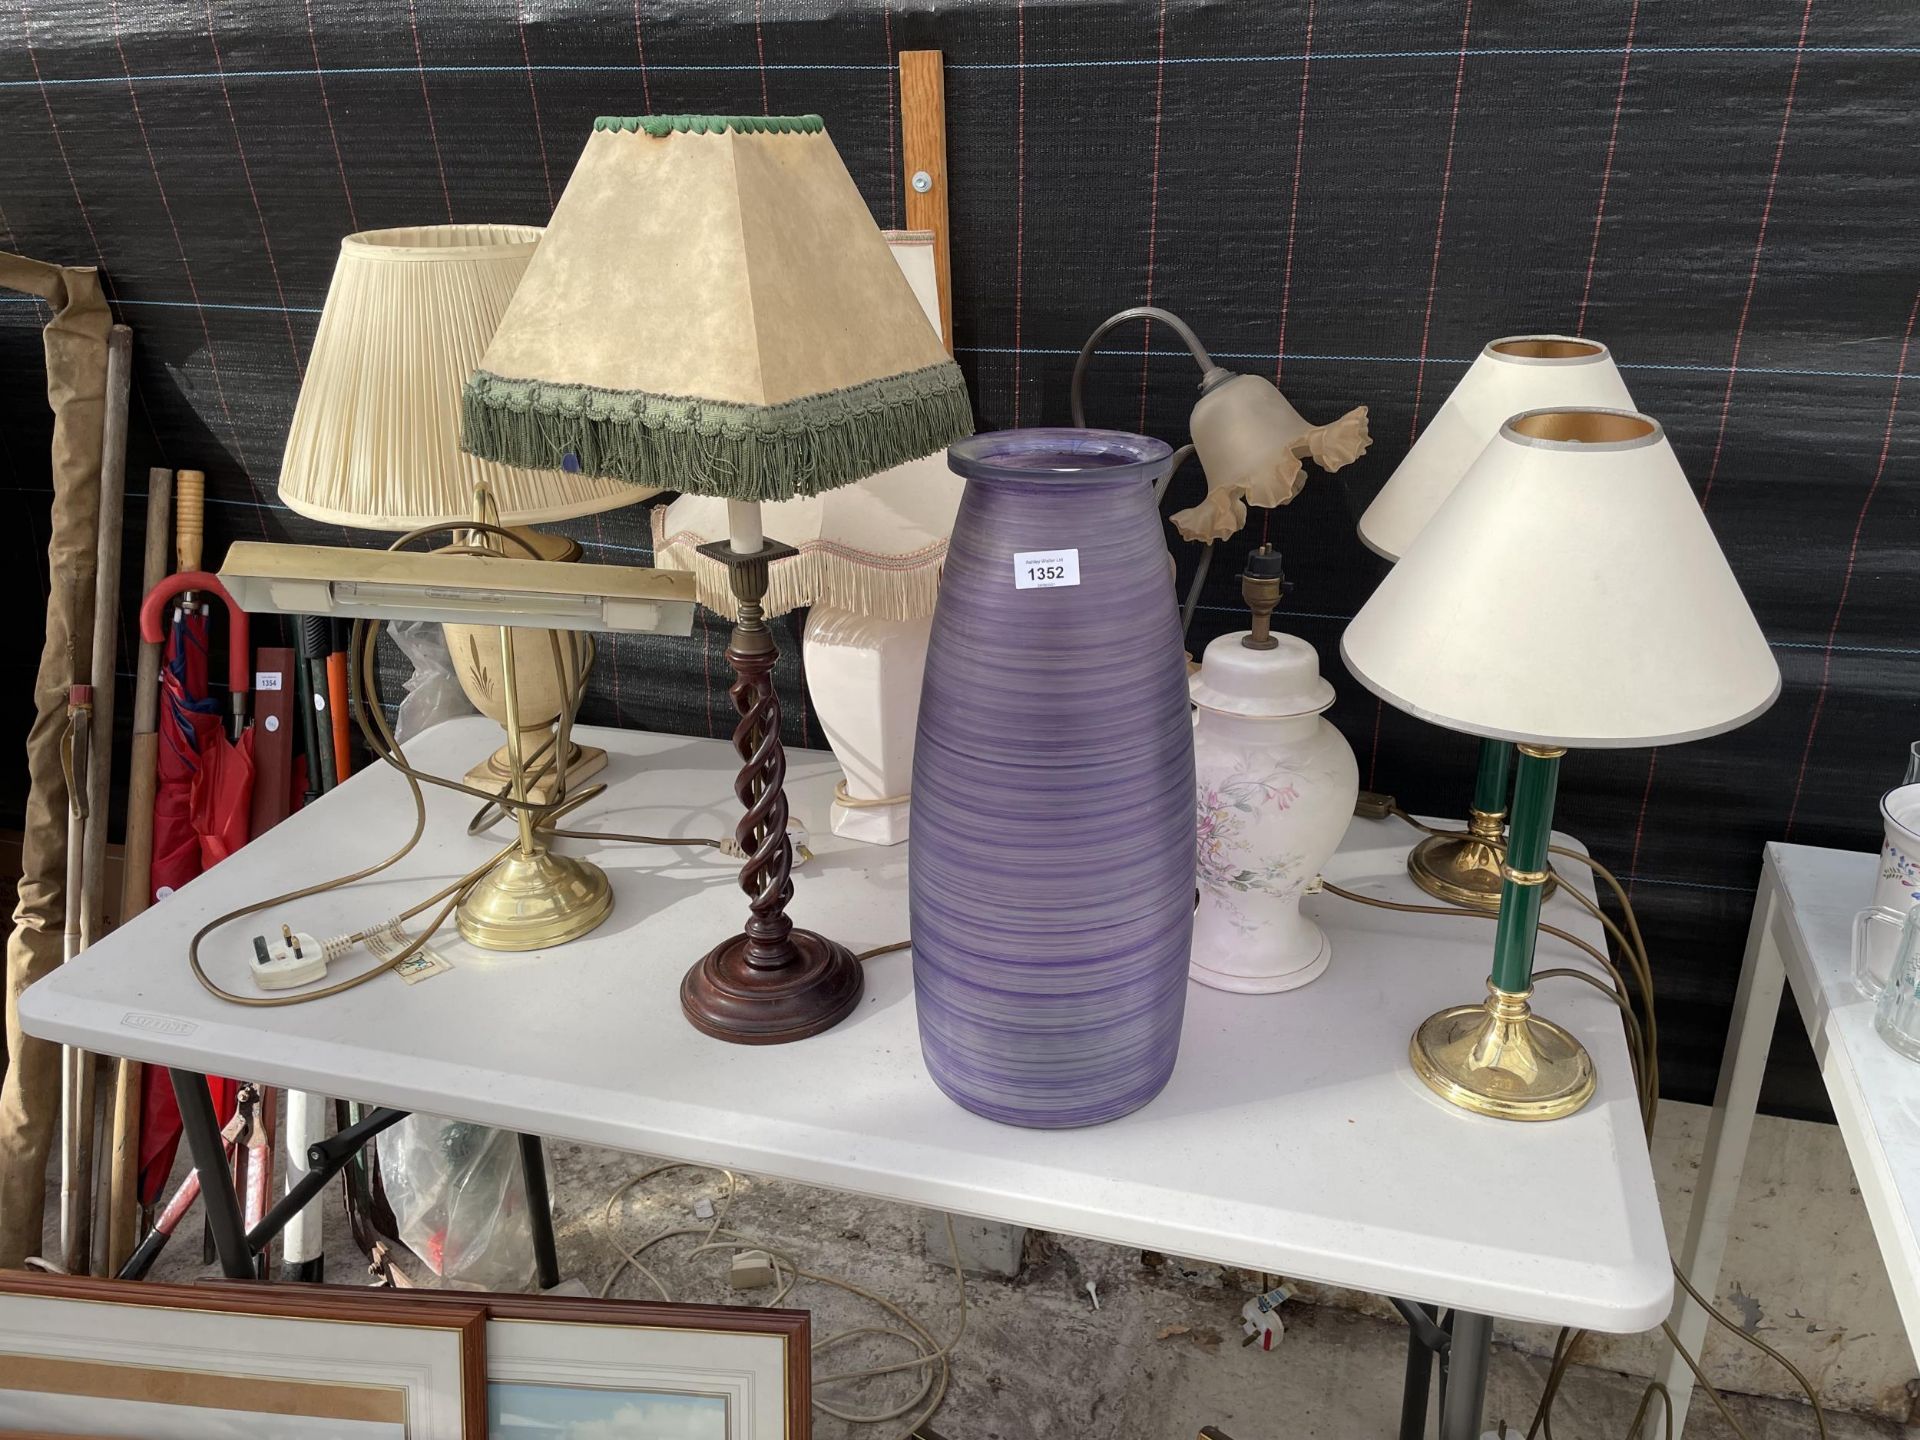 AN ASSORTMENT OF TABLE LAMPS AND A GLASS VASE